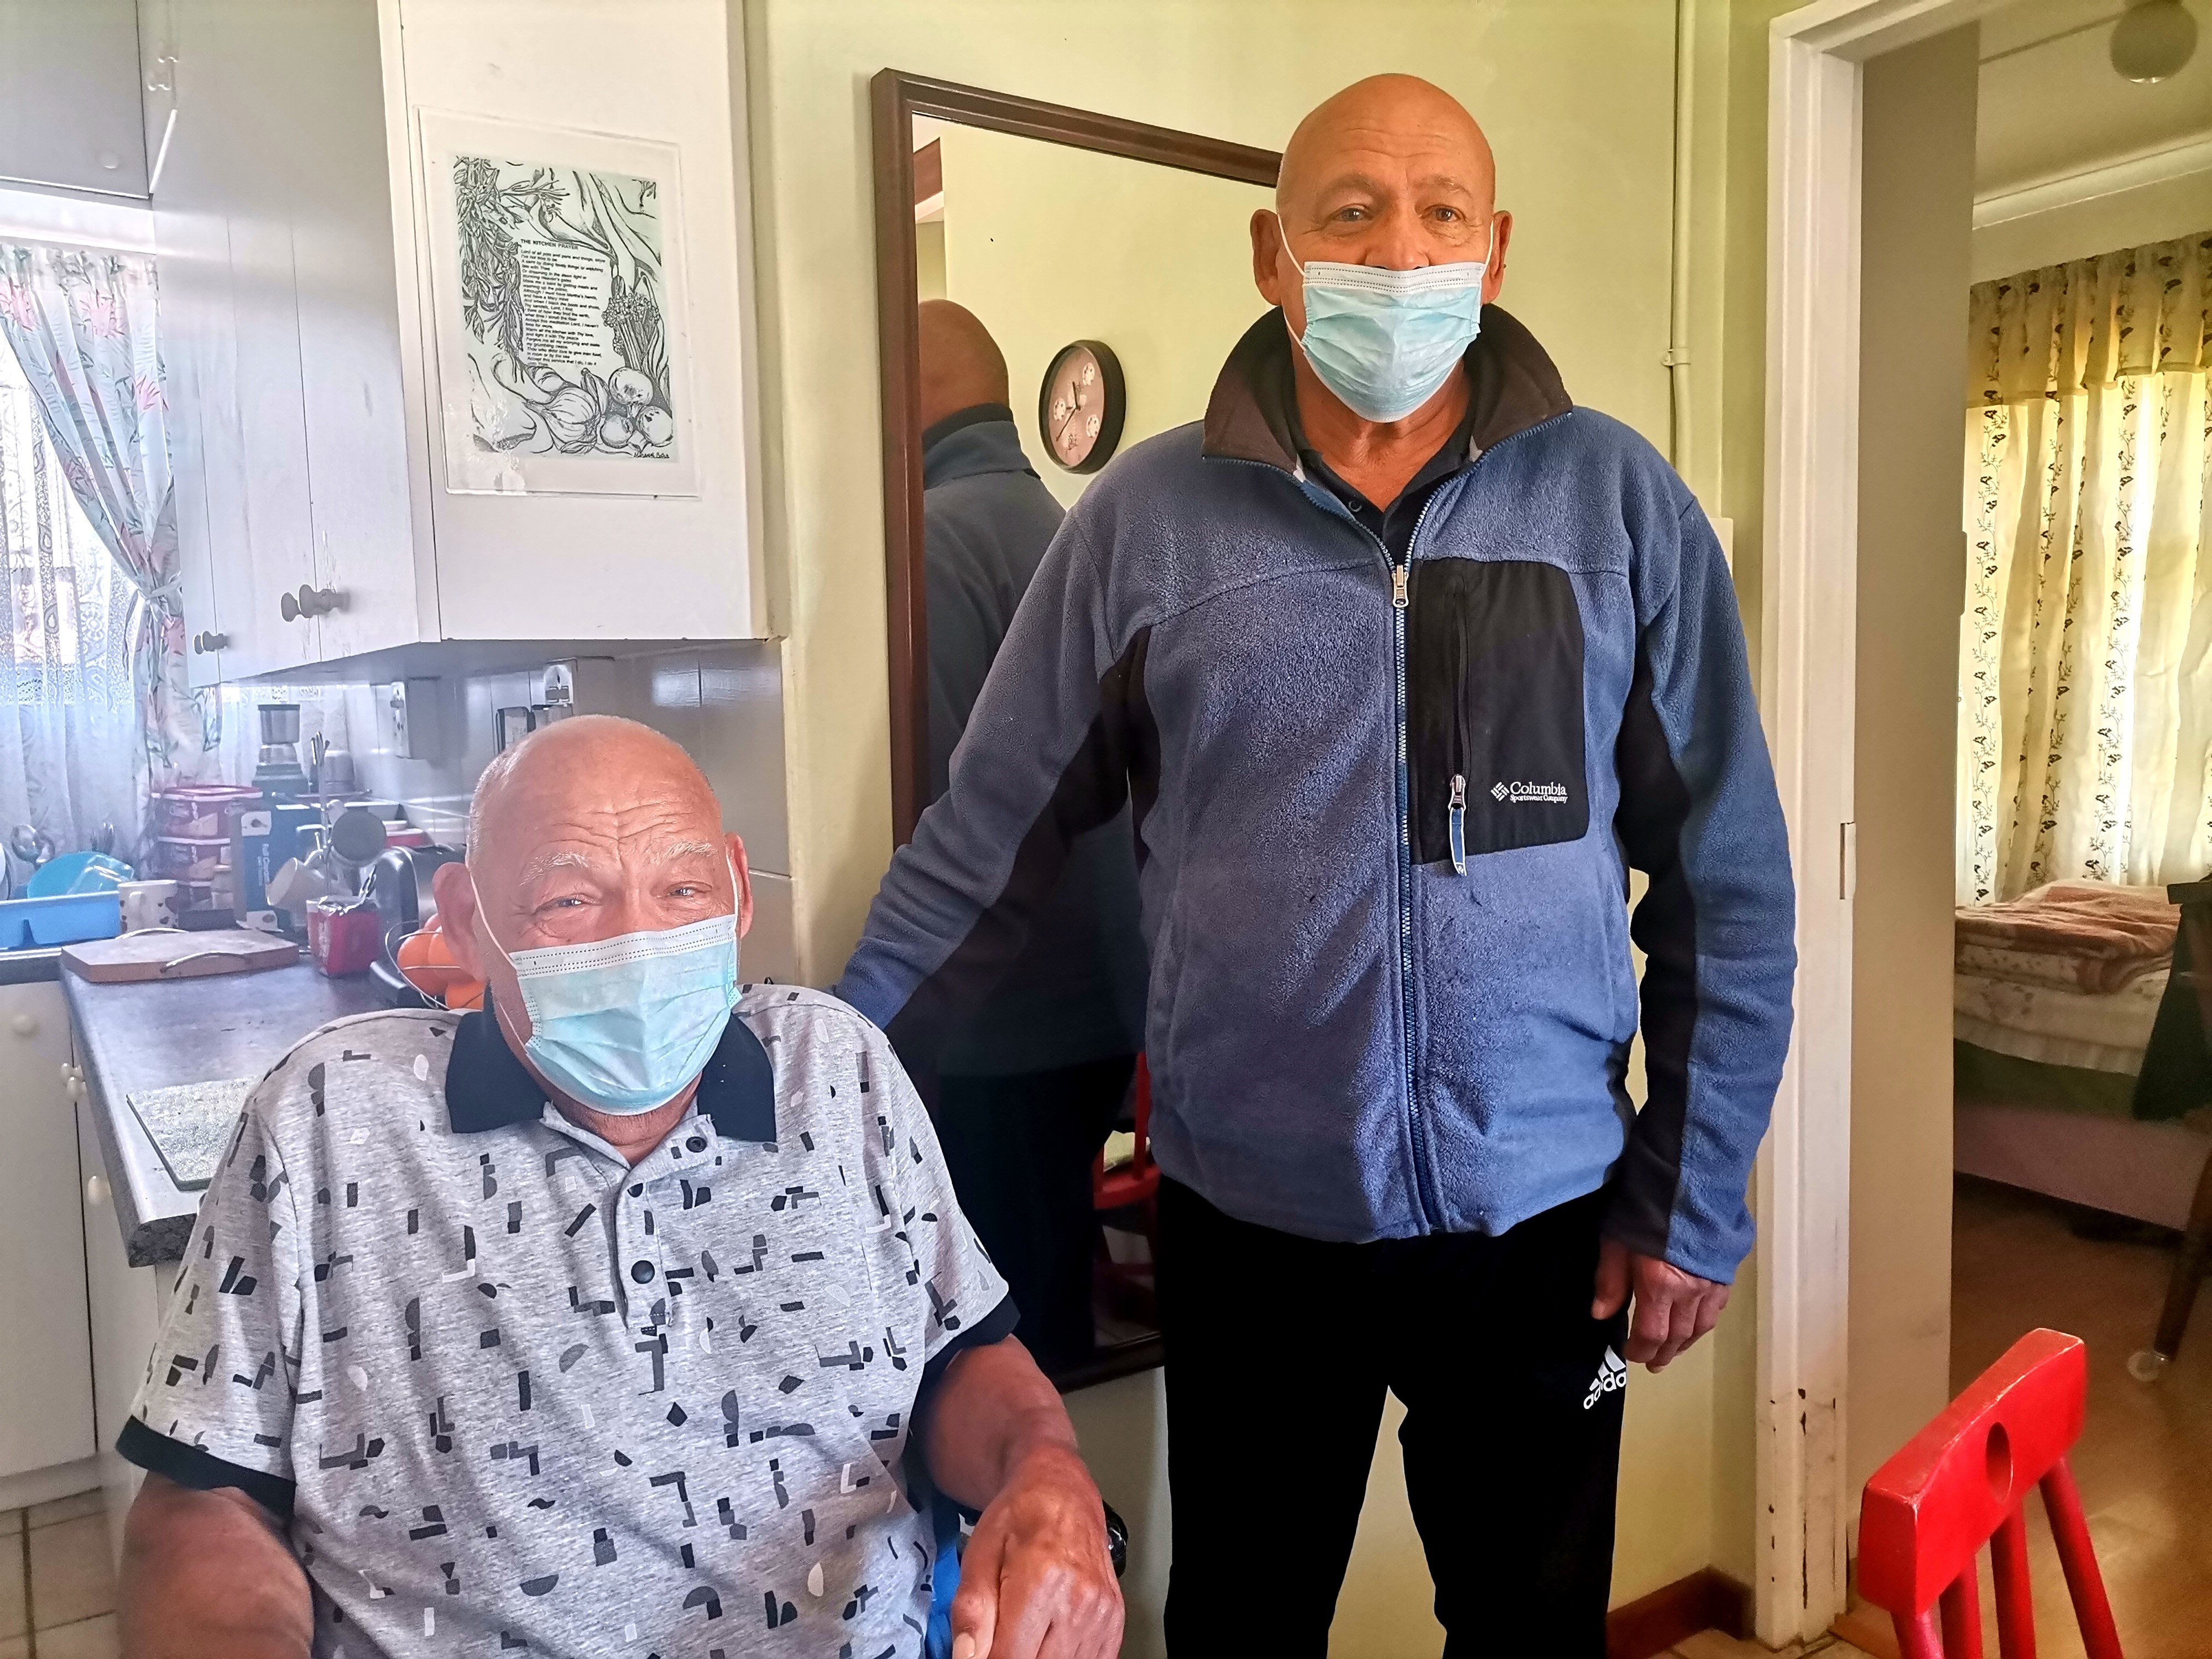 Brothers Adolf and Melvin Treu have thanked palliative care workers for their support.